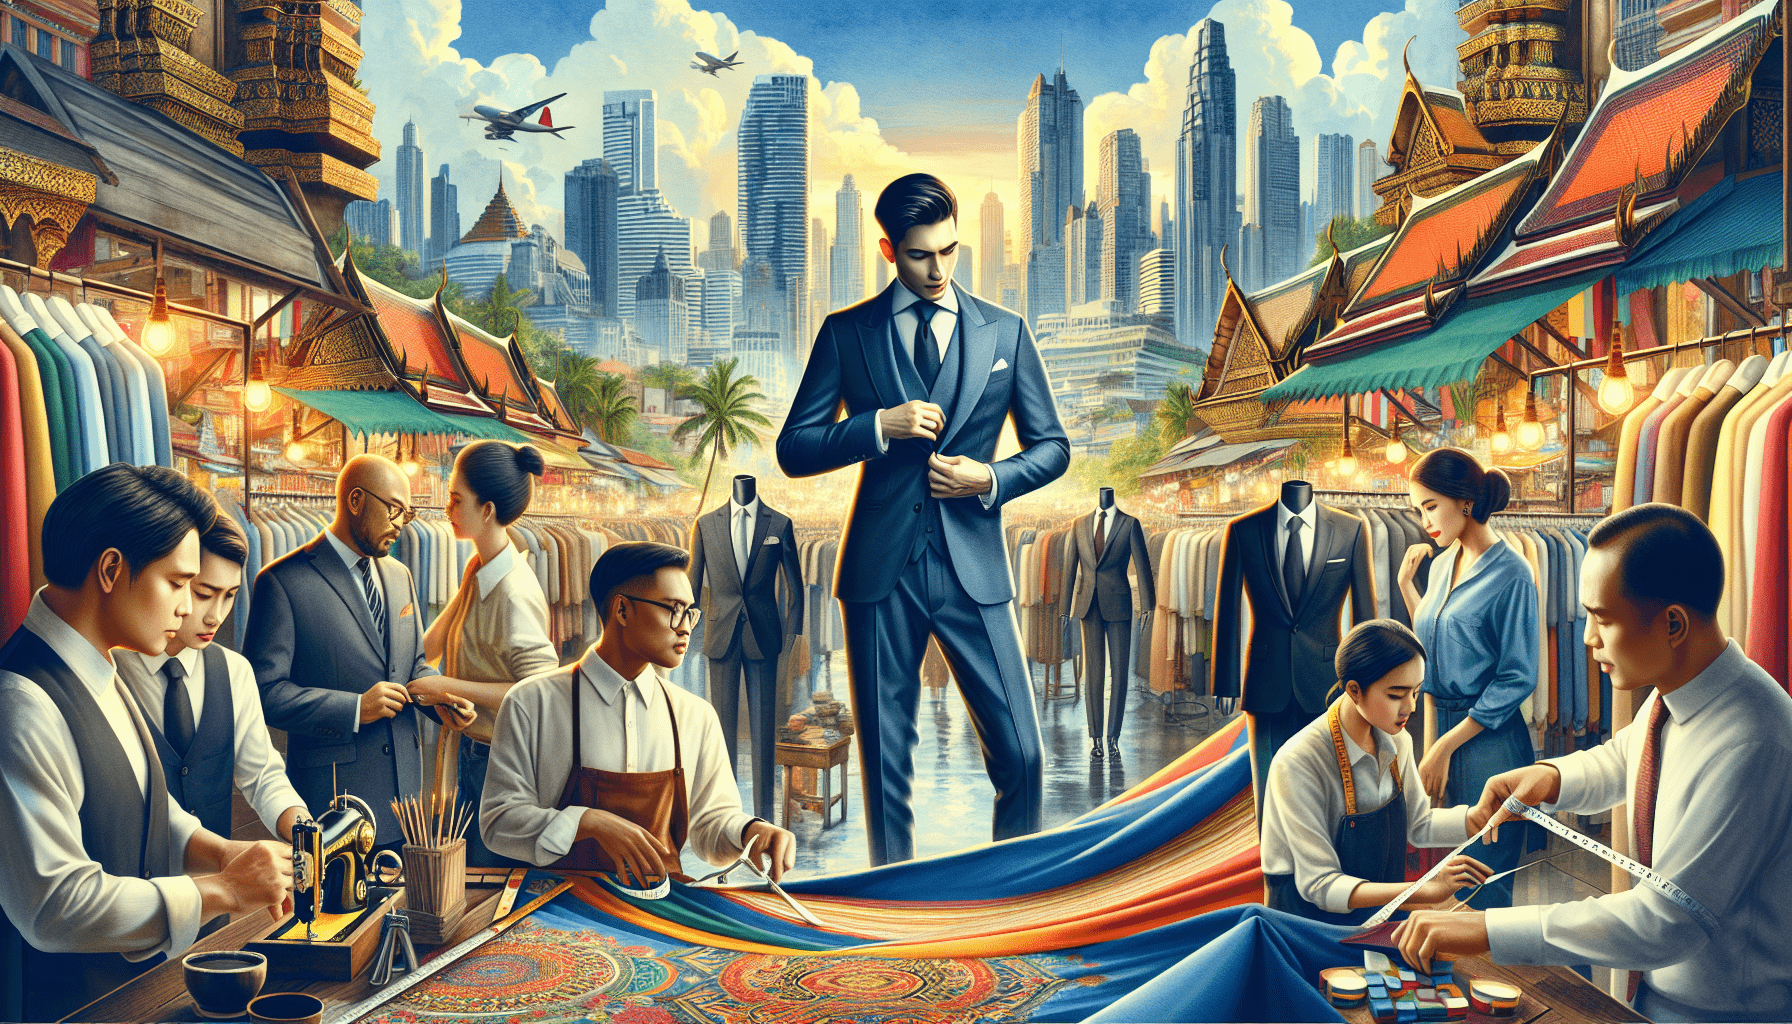 Where To Tailor Suit In Bangkok